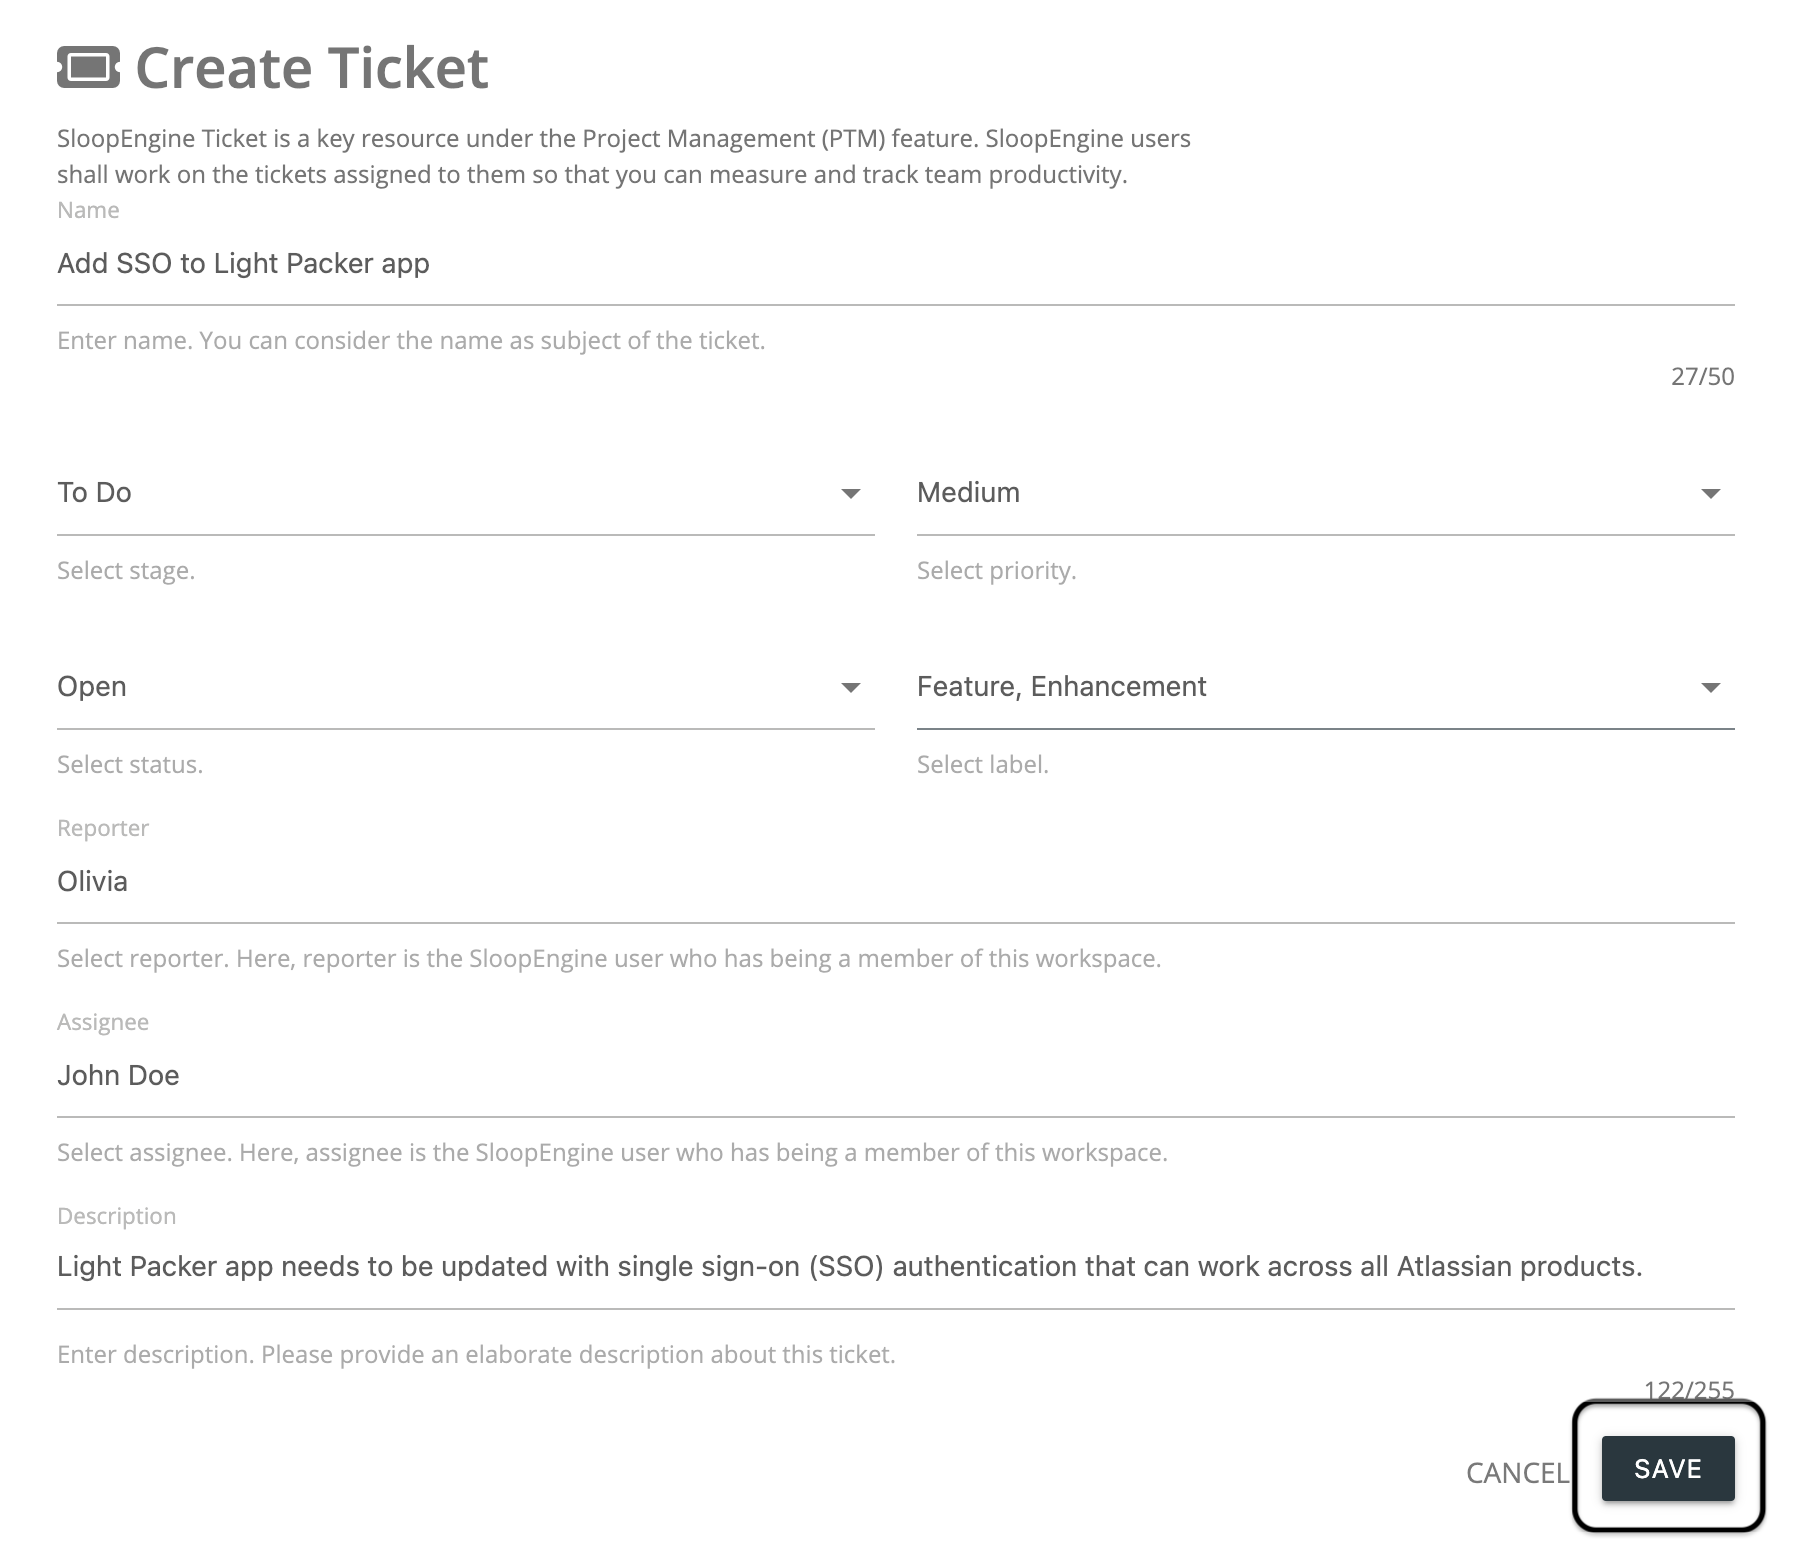 Screenshot of the ticket creation form with valid information.